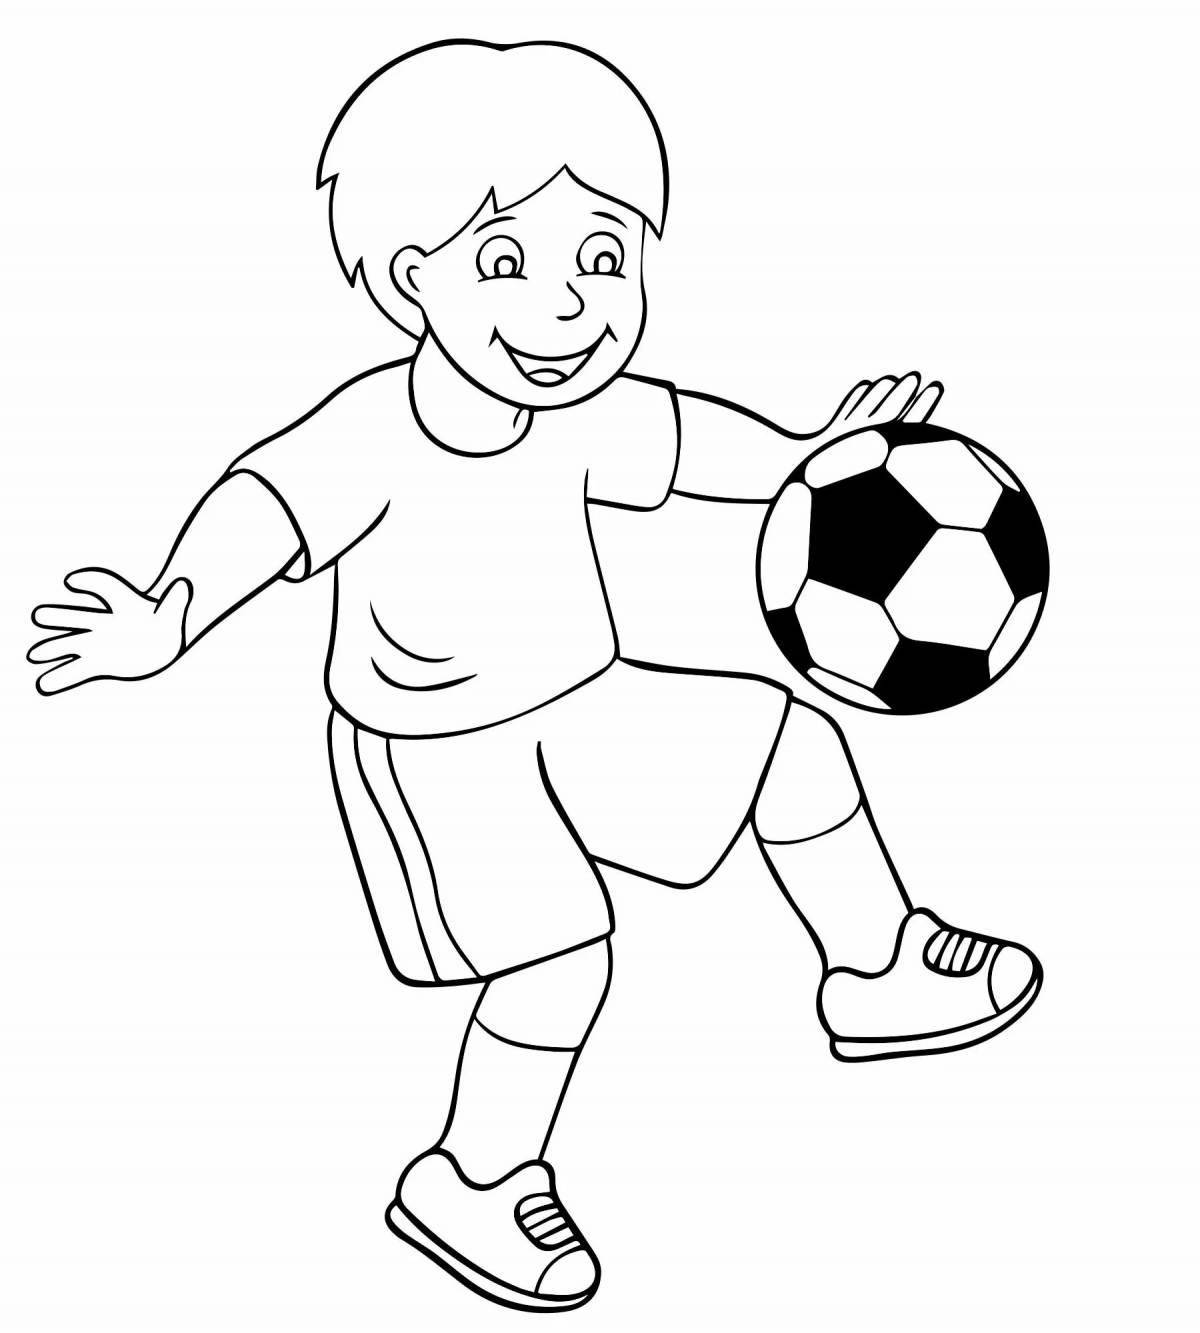 A talented soccer player with a ball